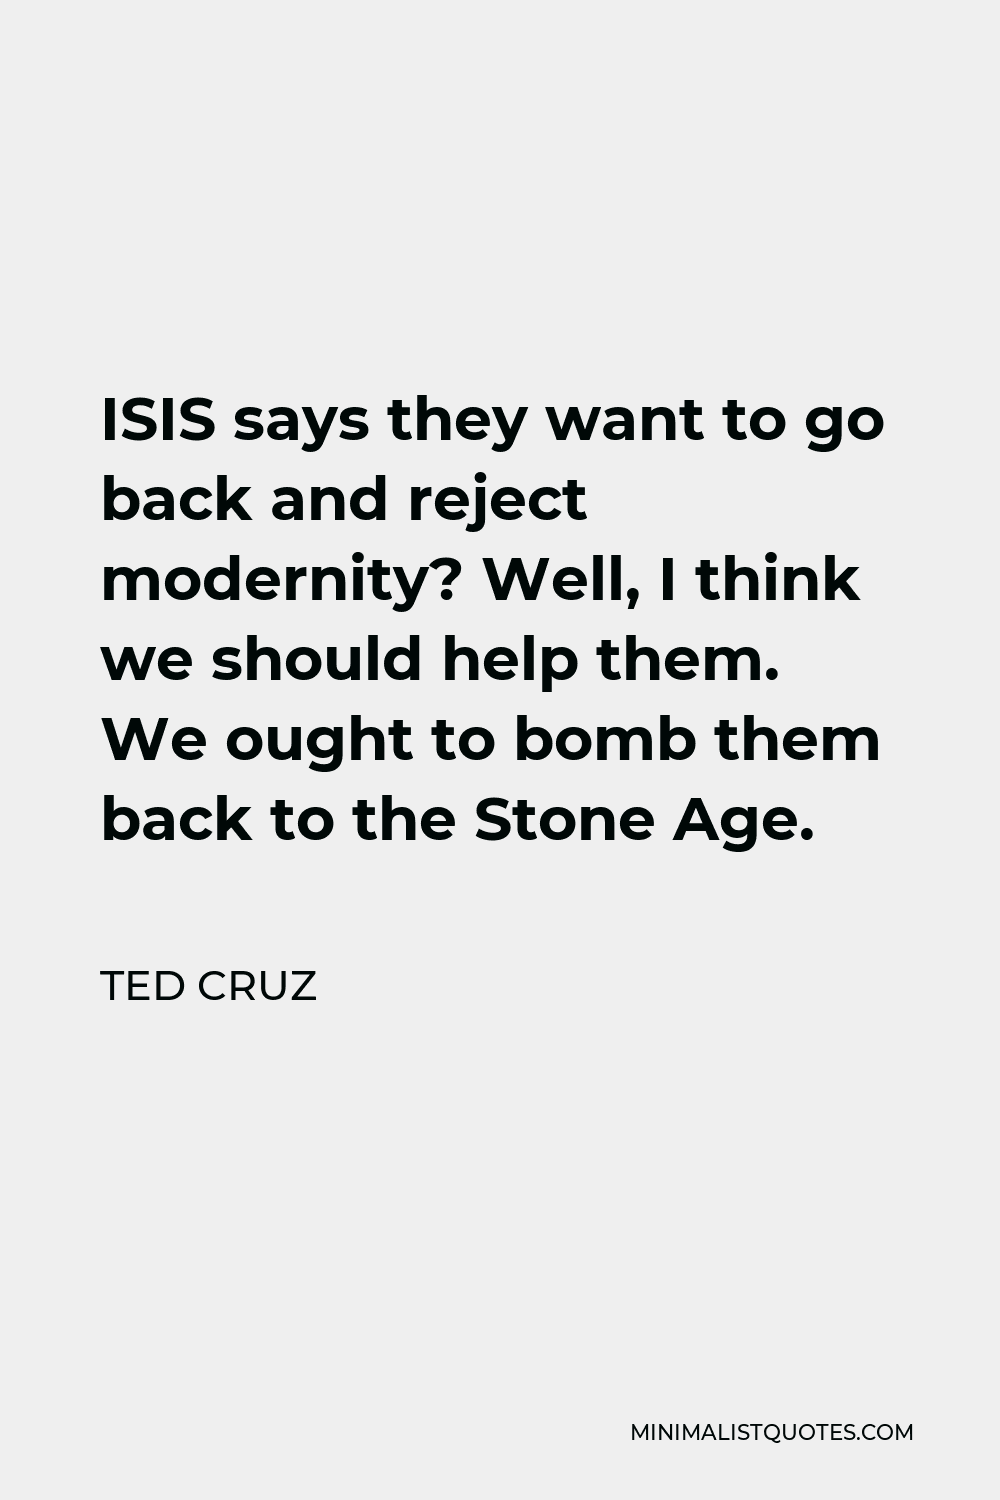 Ted Cruz Quote - ISIS says they want to go back and reject modernity? Well, I think we should help them. We ought to bomb them back to the Stone Age.